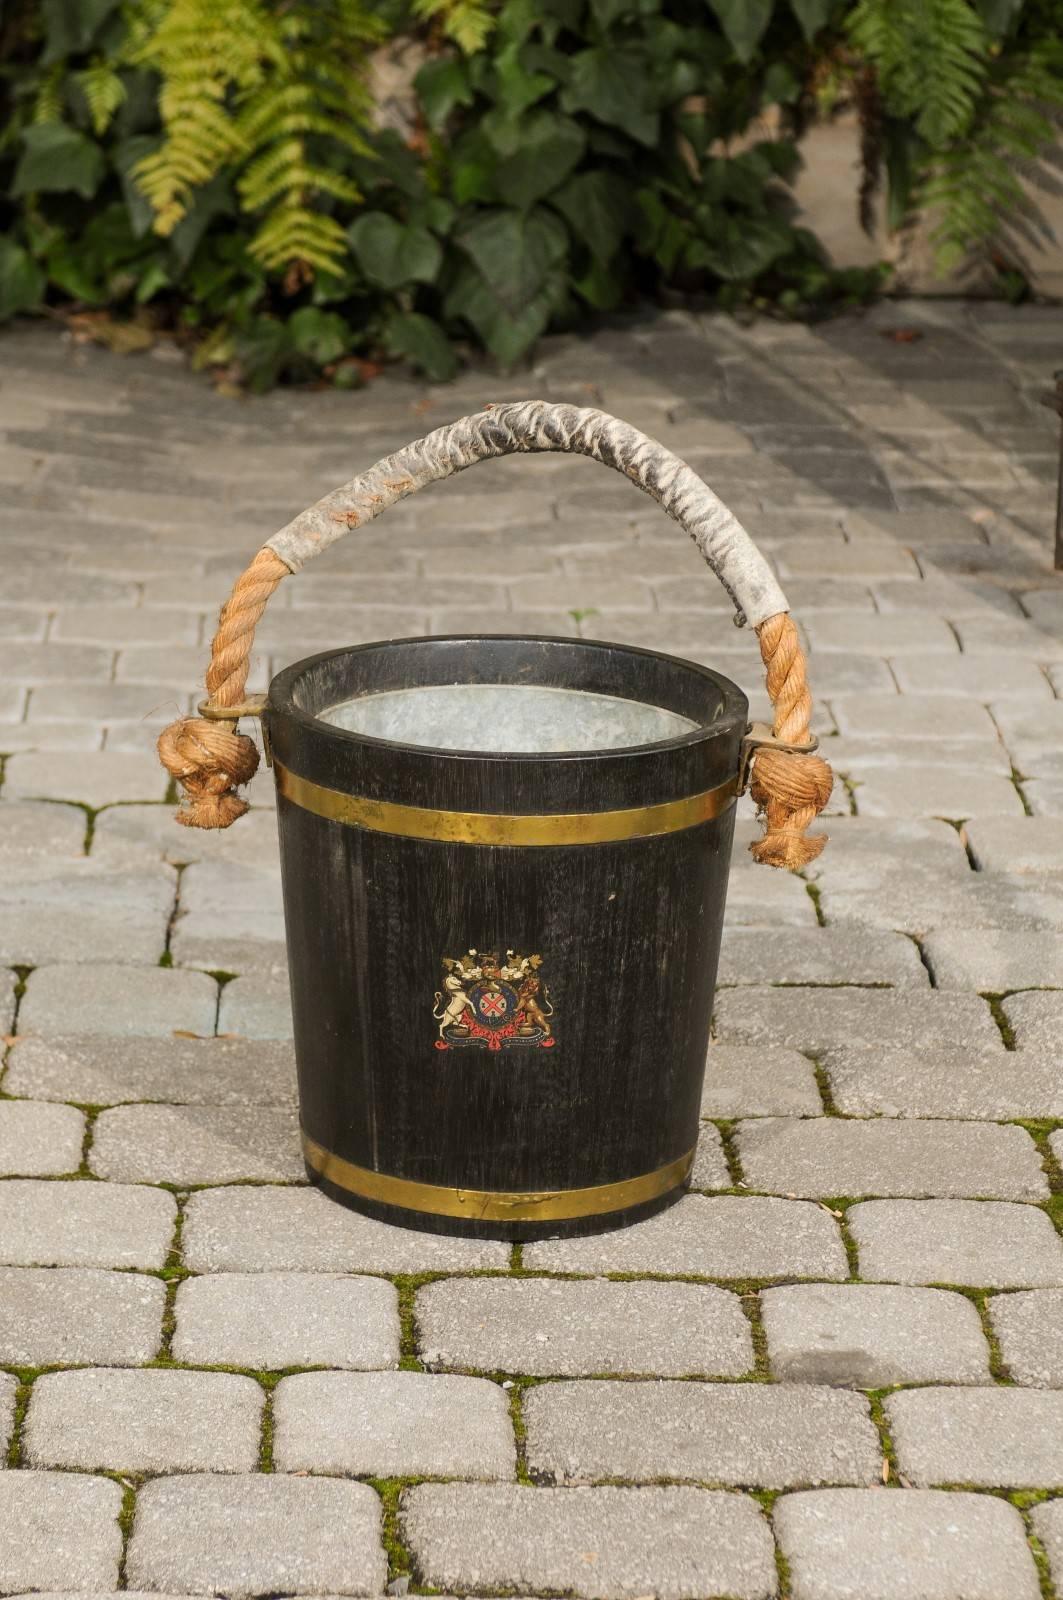 An English Champaign bucket made of oak with copper bands and a coat of arms from the late 19th century. This oak bucket retains its tin liner which is intended to protect the wood. The bucket is made of dark oak slats secured by two copper bands. A